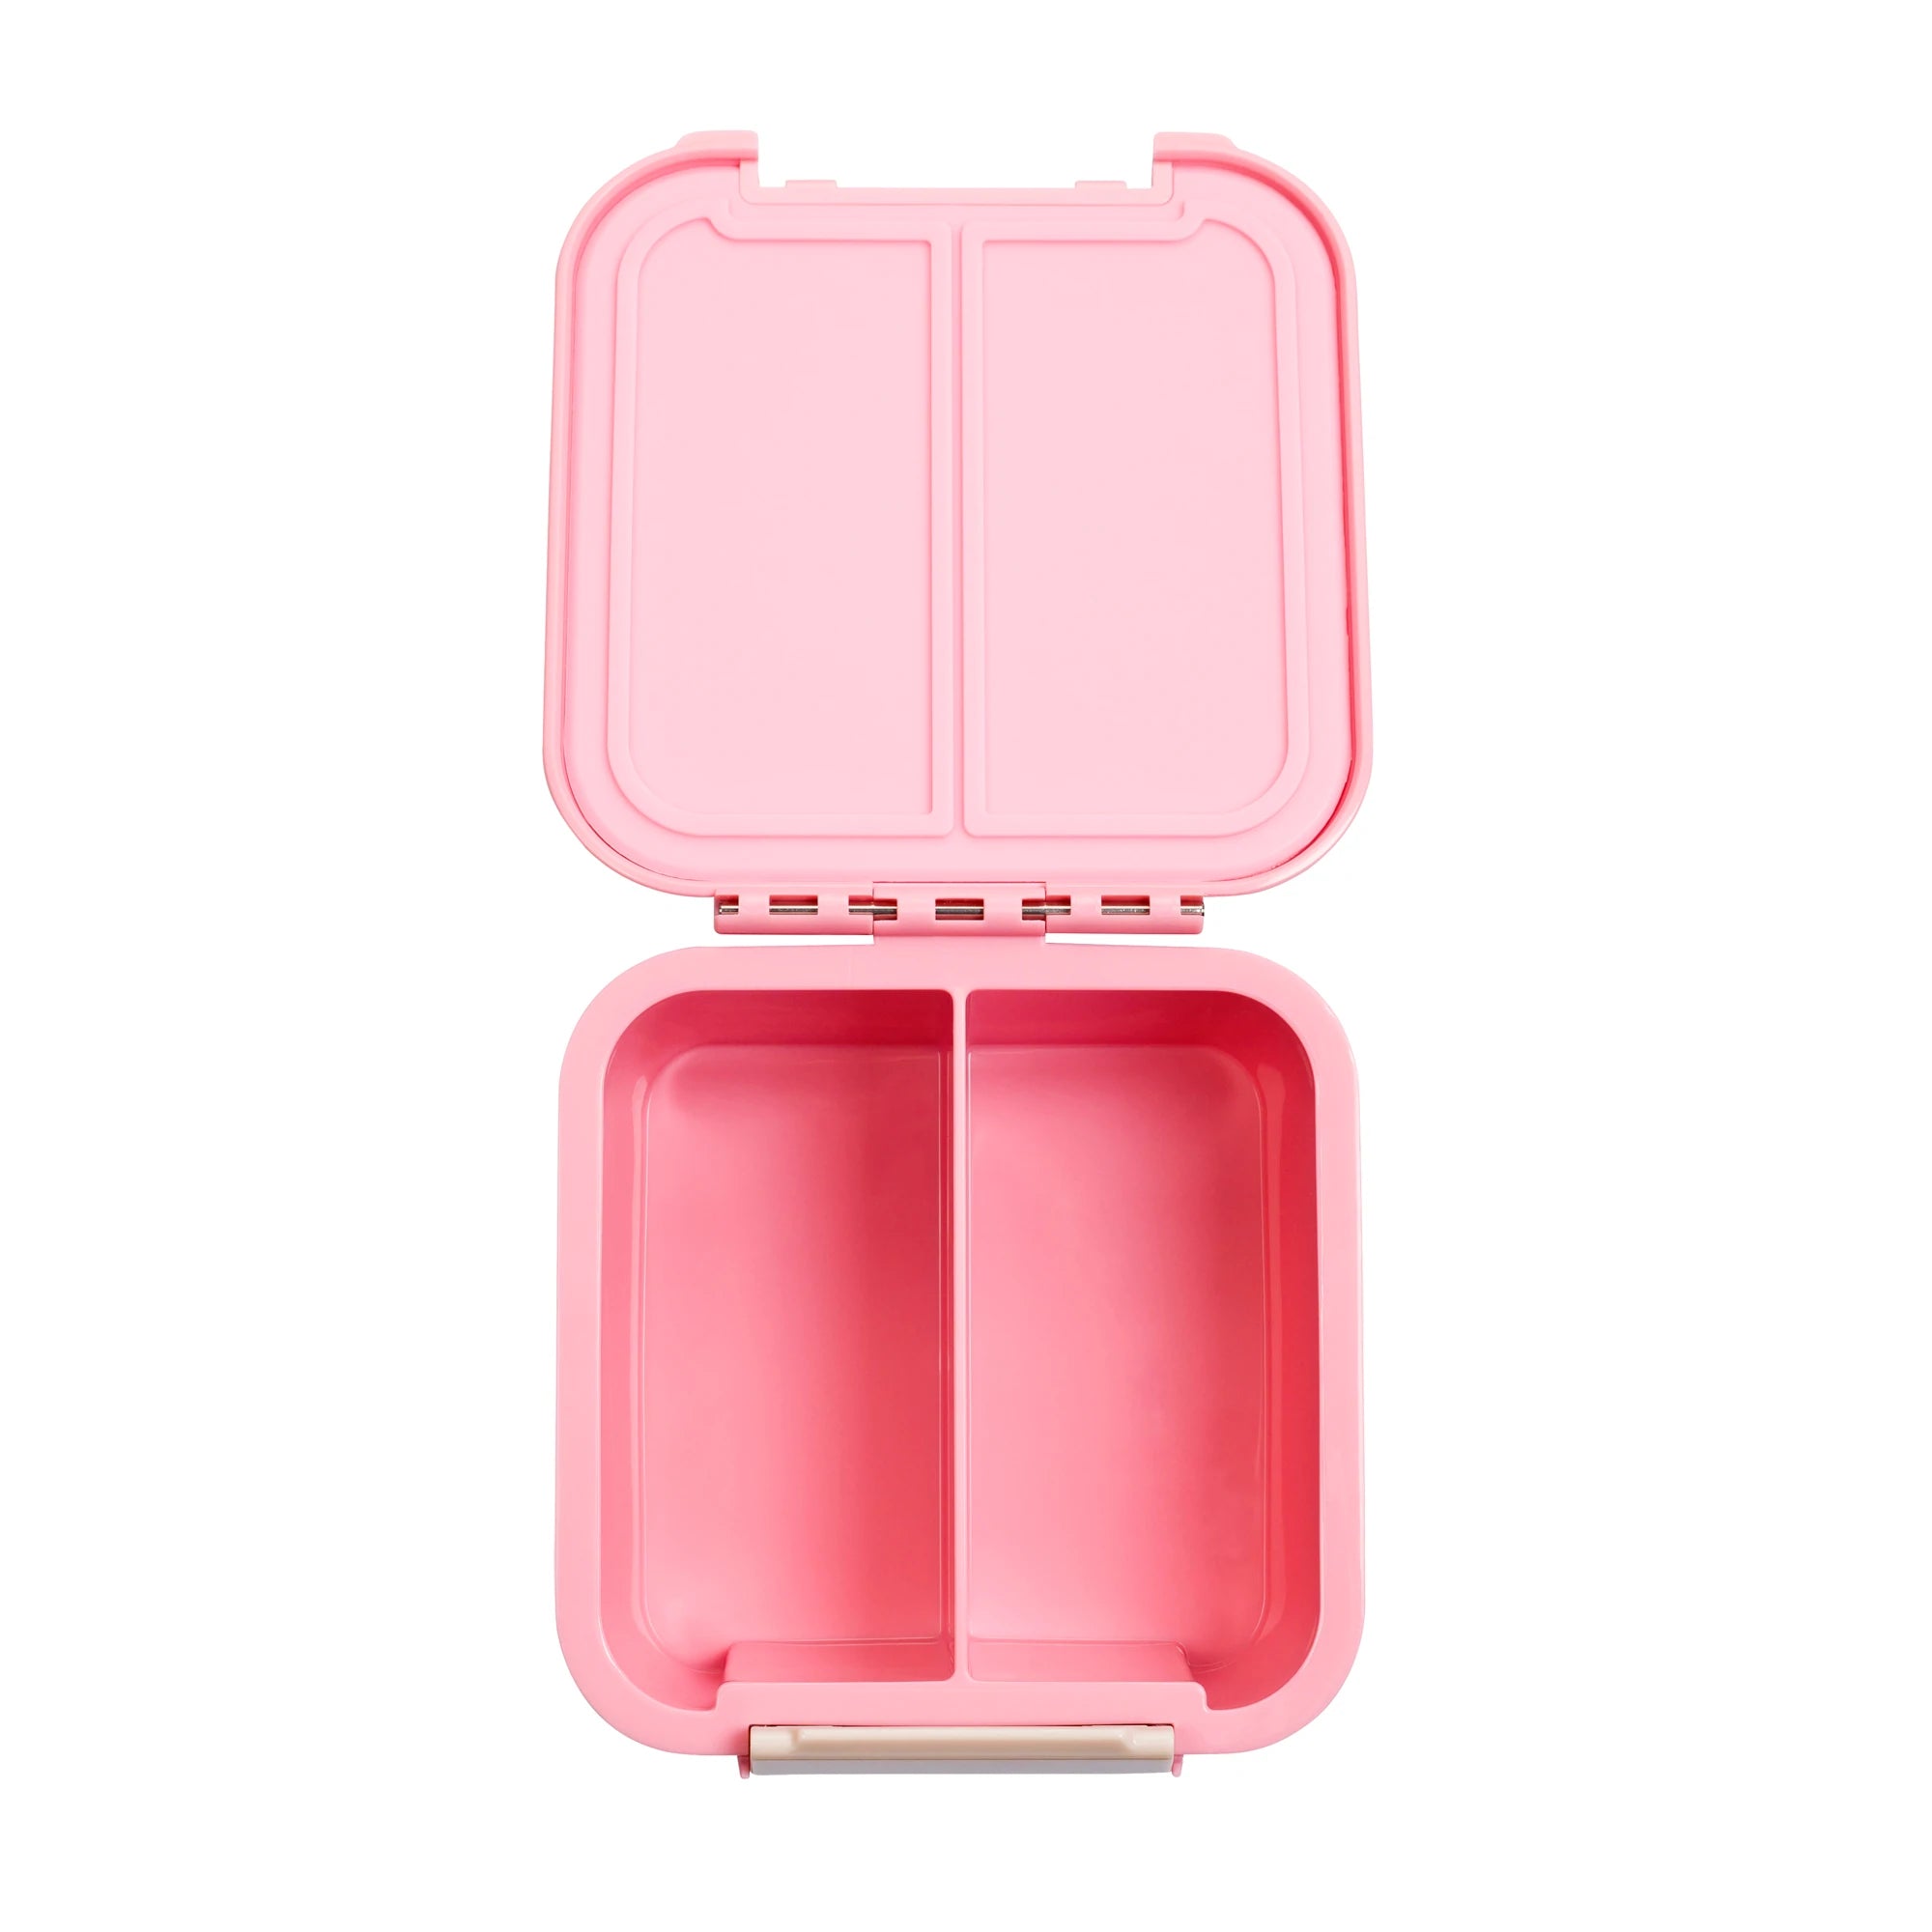 Little Lunch Box Co. Bento Two (Snack Size): Blush Pink